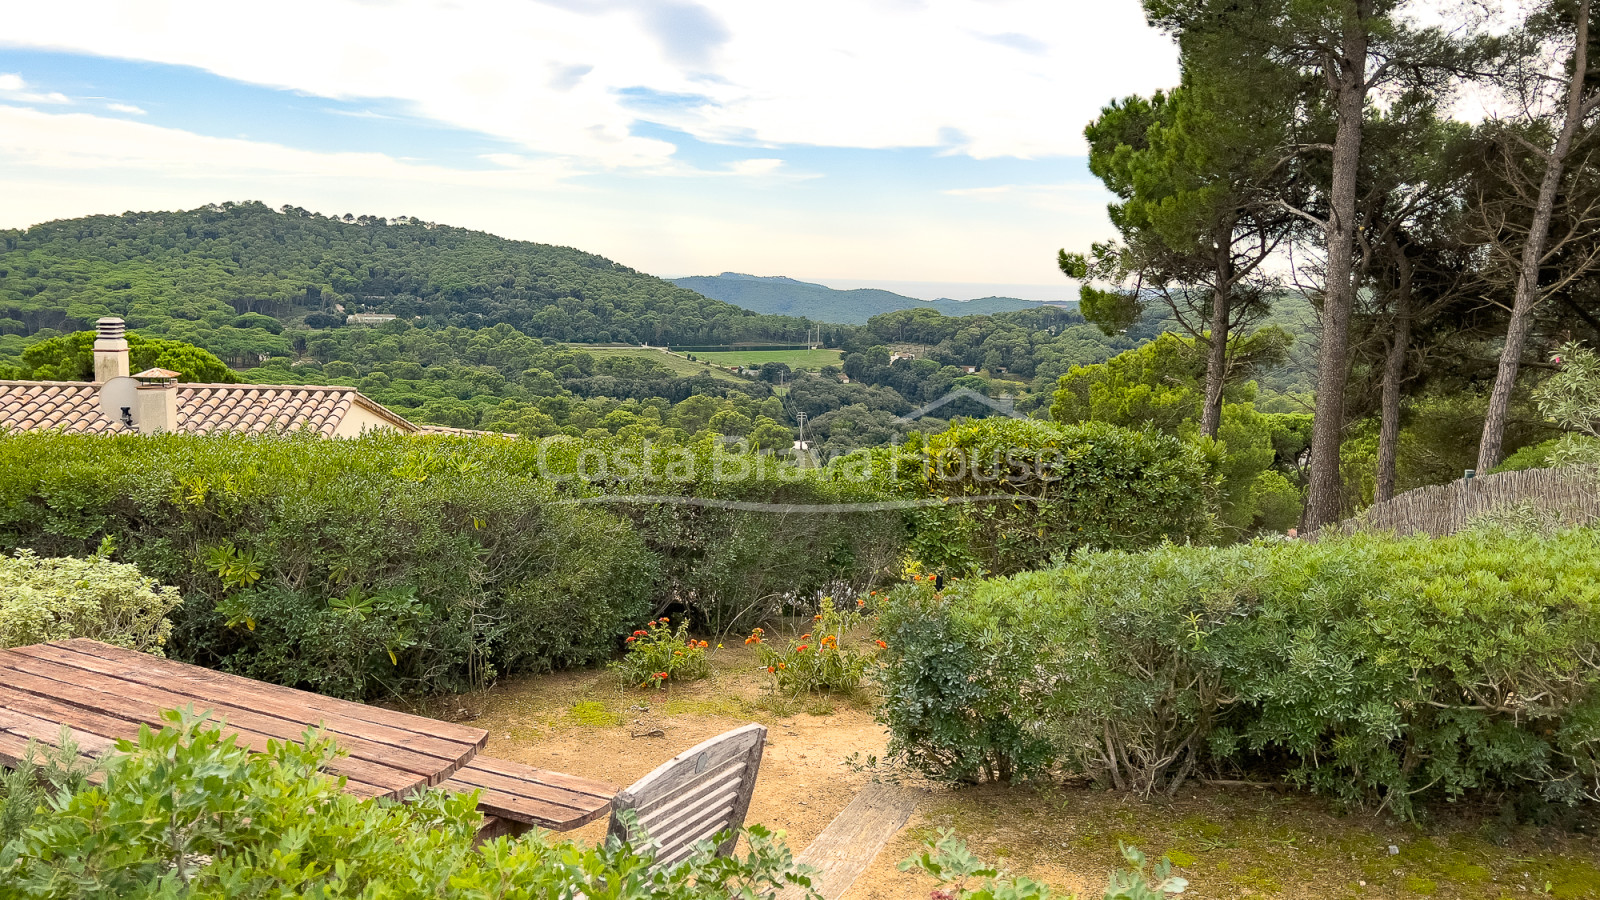 Land 2 minutes from the center of Begur